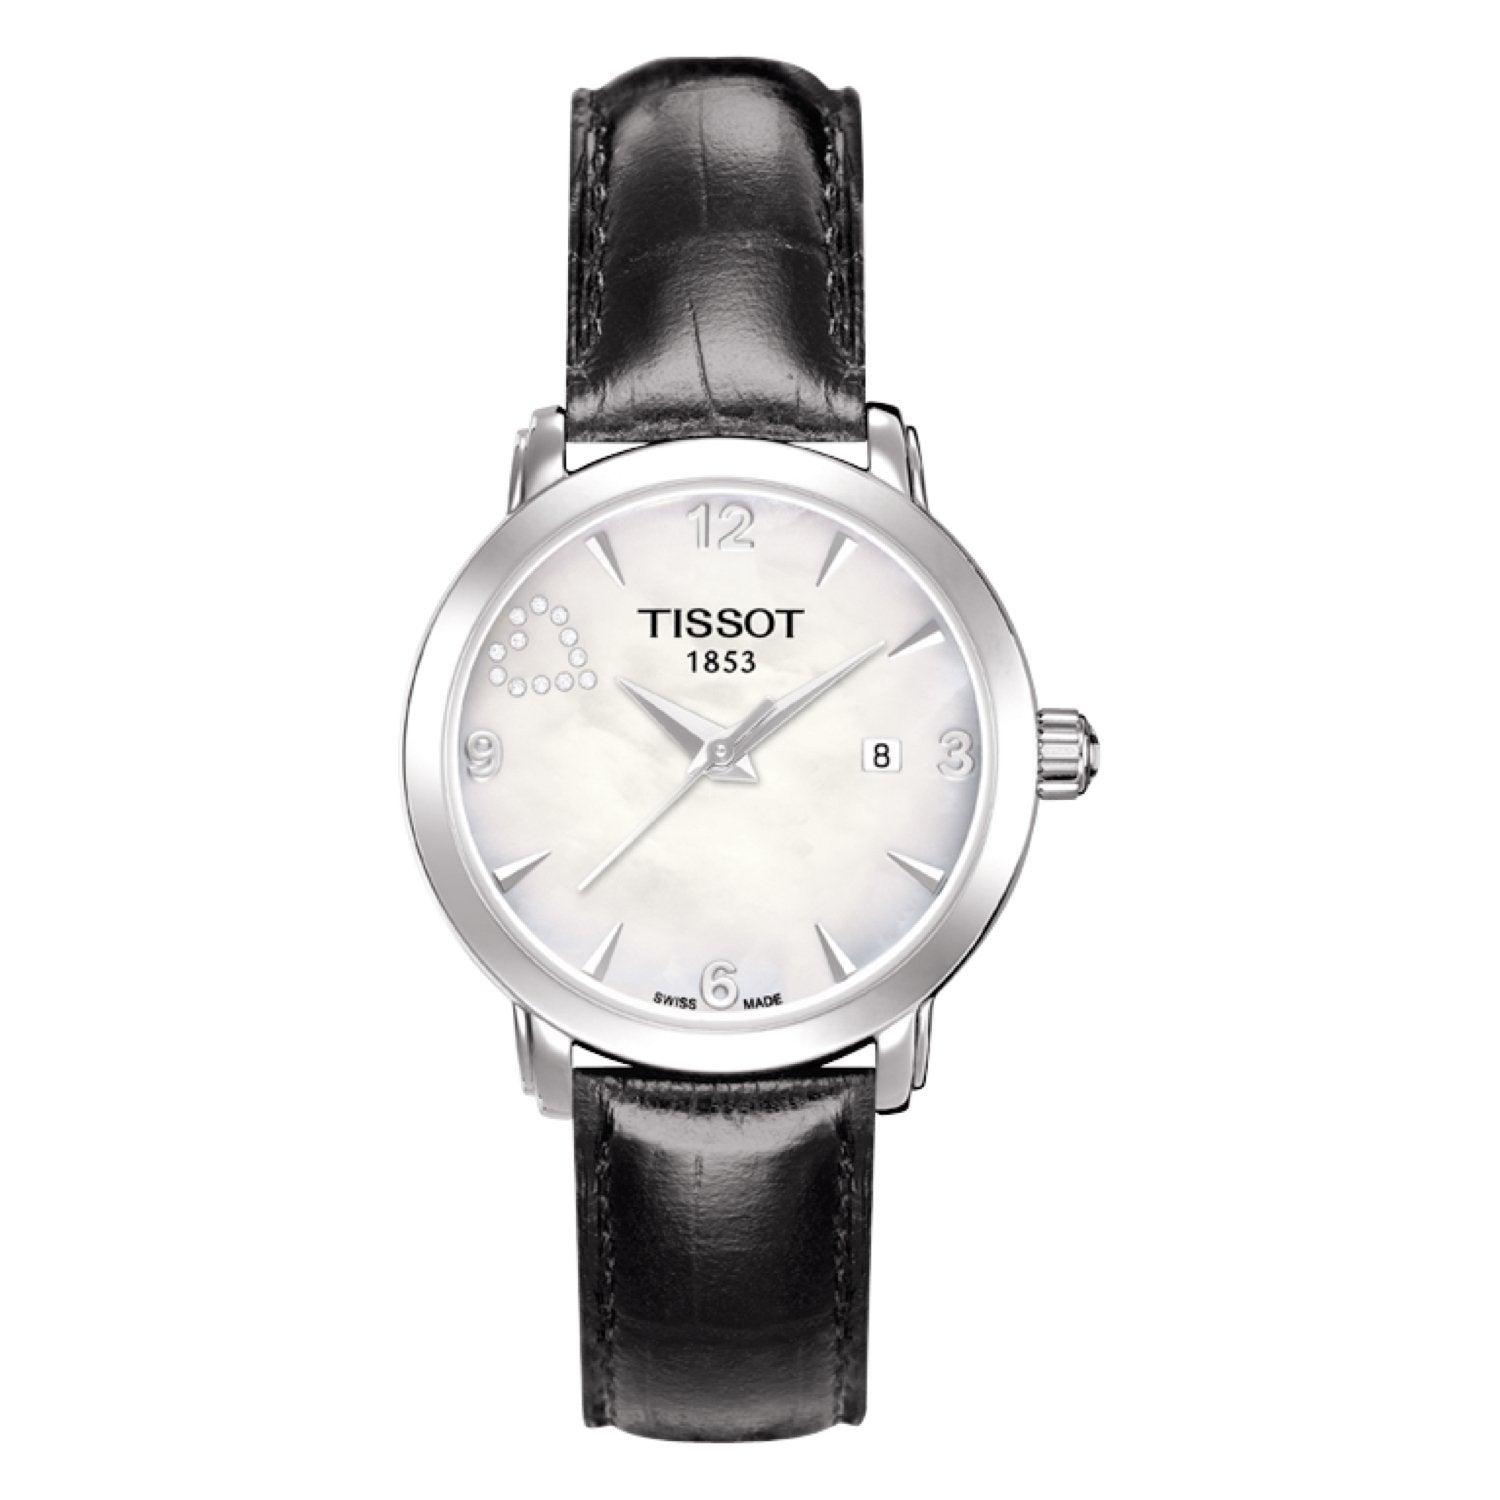 Tissot 13mm Every Time Black leather strap with deployant buckle image